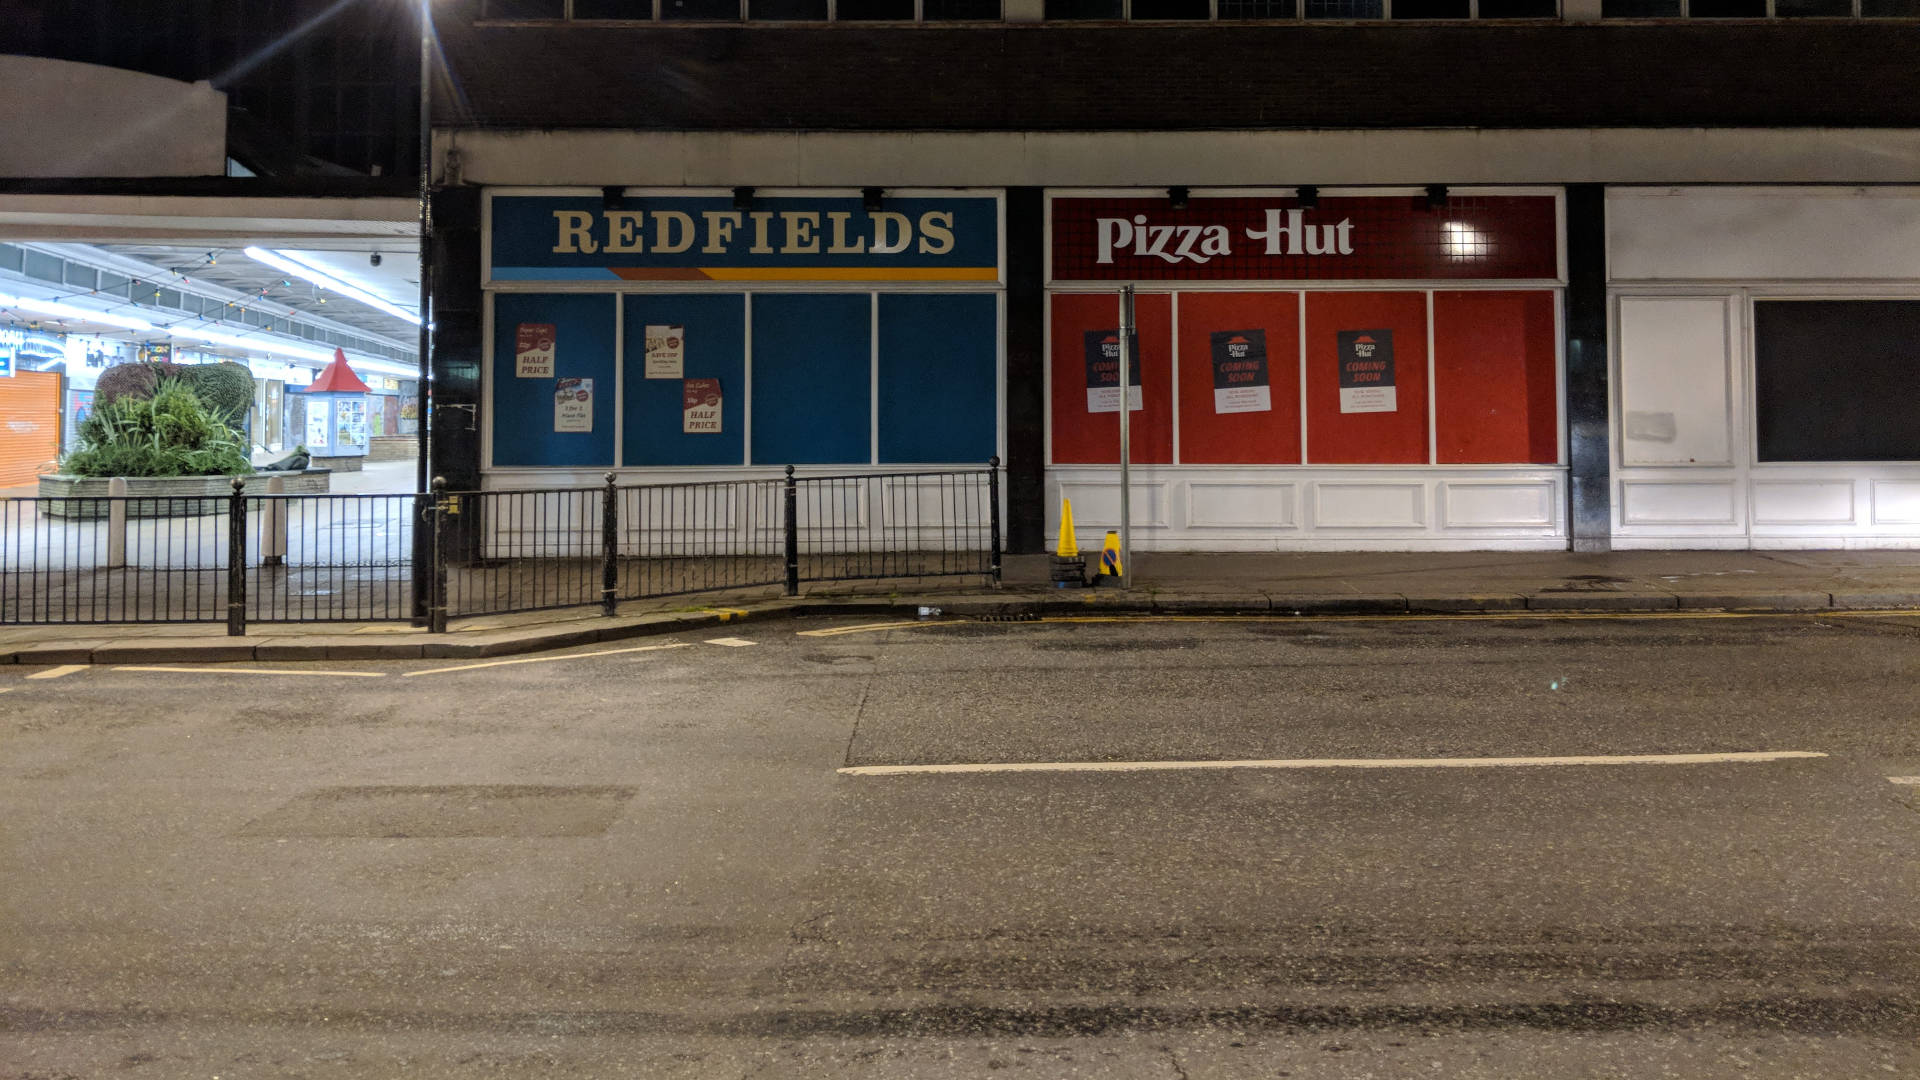 Pizza Hut And Redfields Stores Background